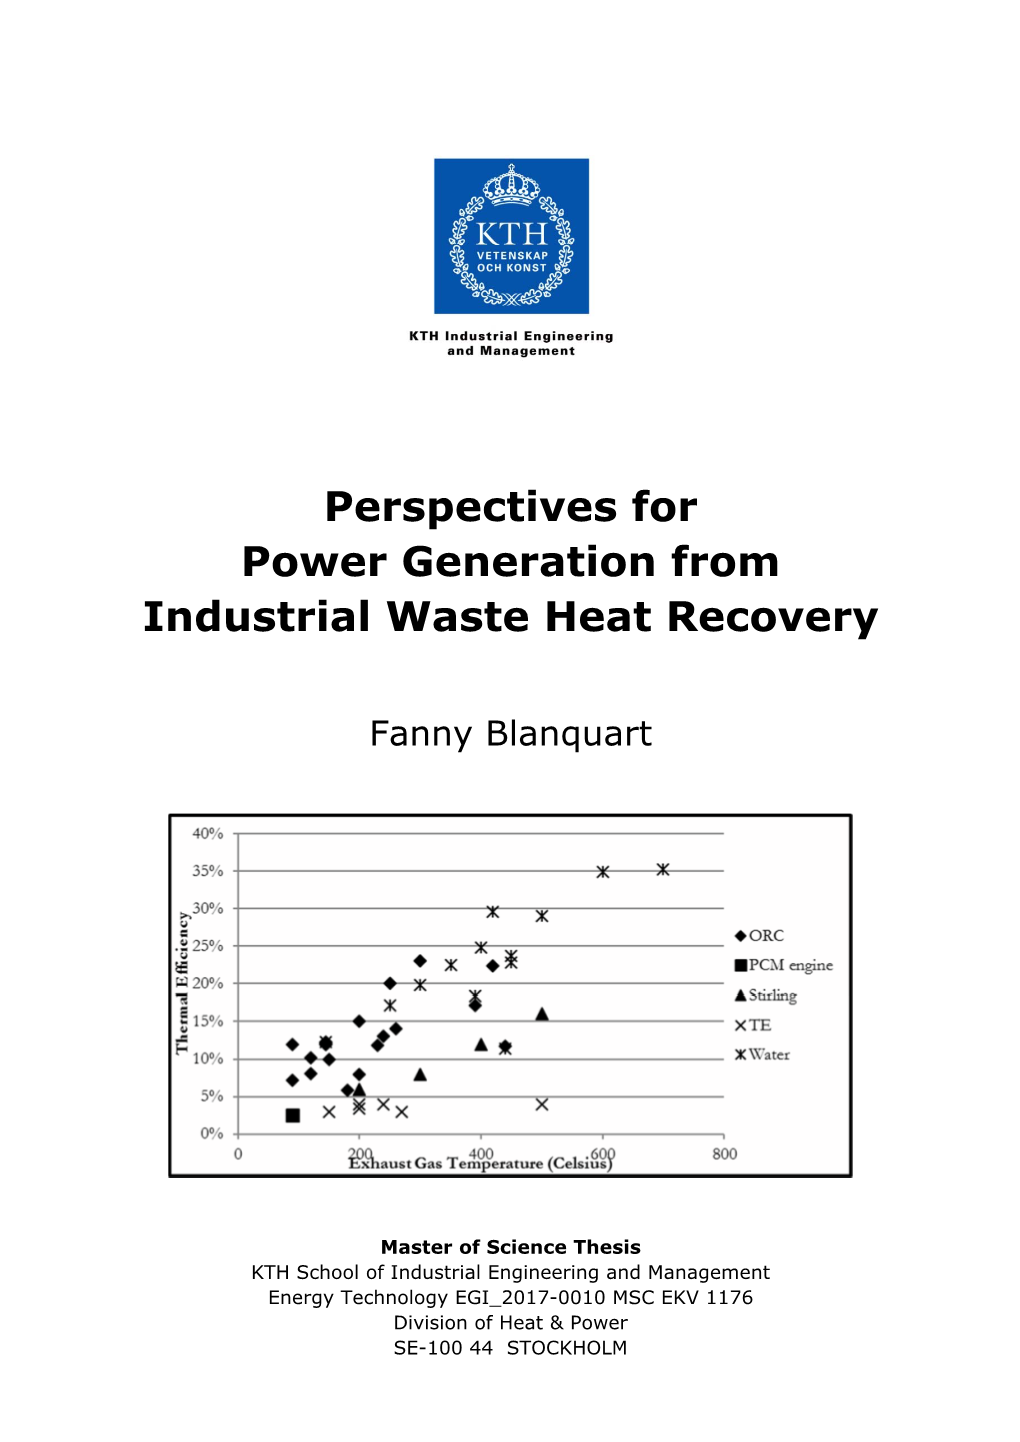 Perspectives for Power Generation from Industrial Waste Heat Recovery